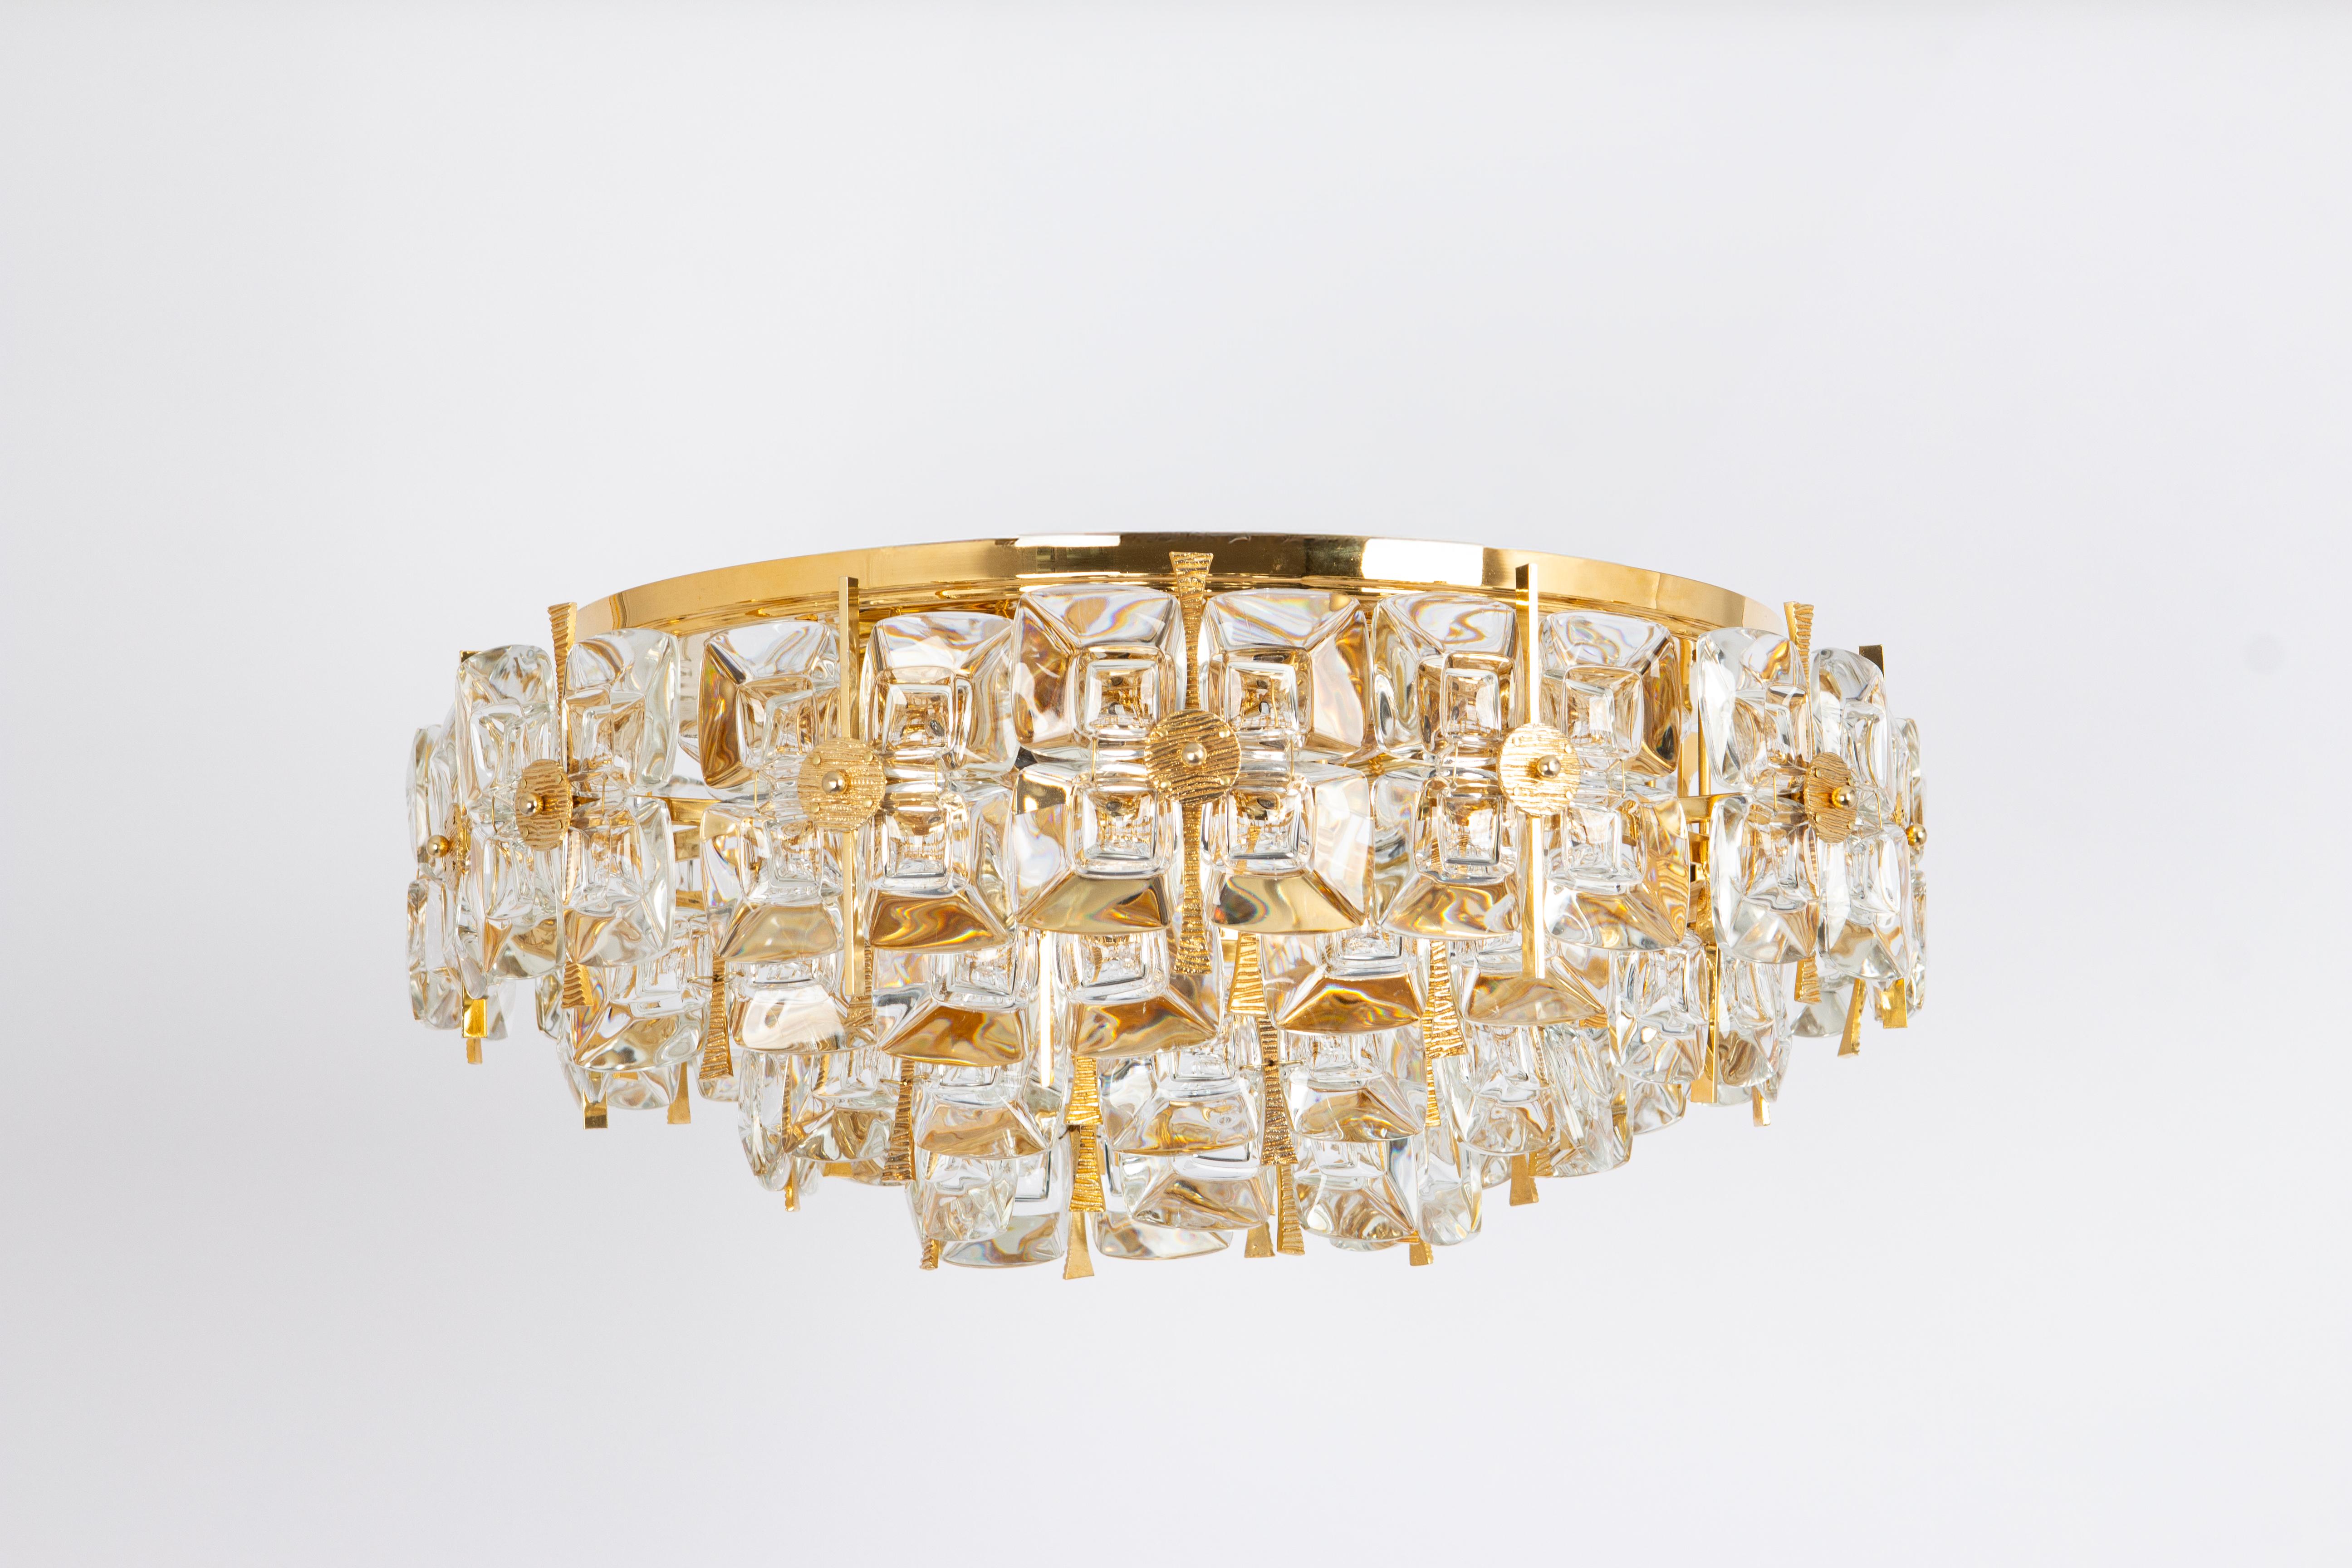 A wonderful and high-quality gilded chandelier or pendant light fixture by Palwa , Germany, 1970s.
It is made of a 24-carat gold-plated brass frame decorated with individual 